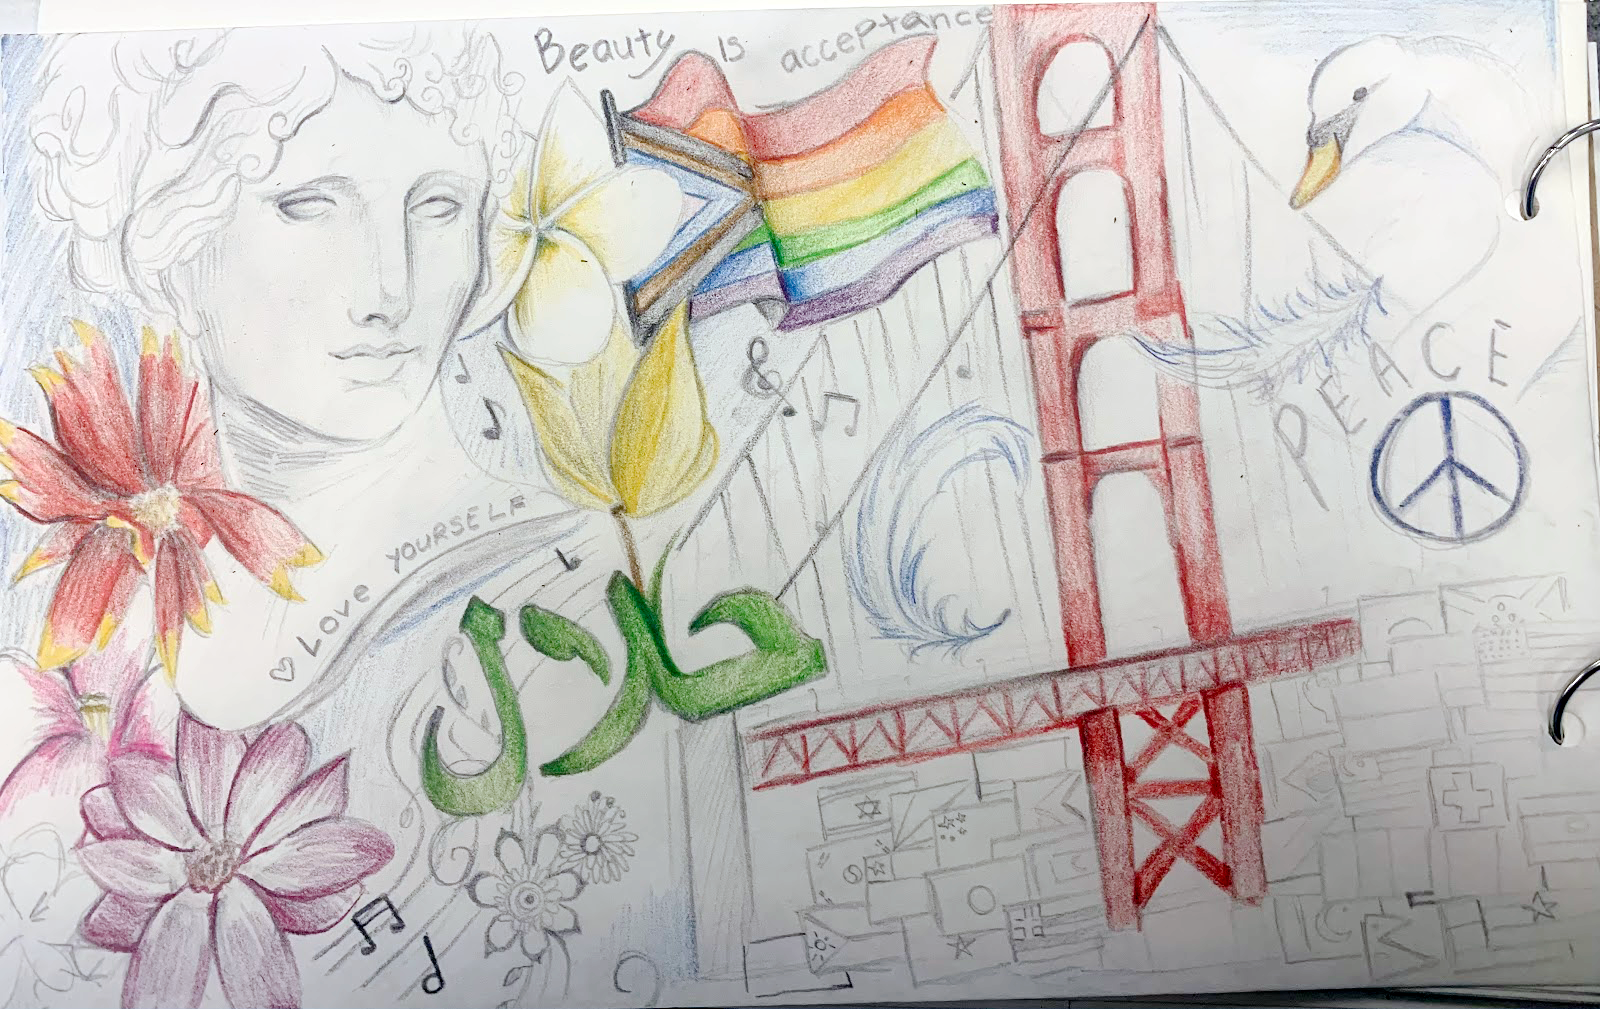 colored pencil drawing of a roman-looking face, flowers, golden gate bridge, feathers, a peace sign, and small flags from different countries